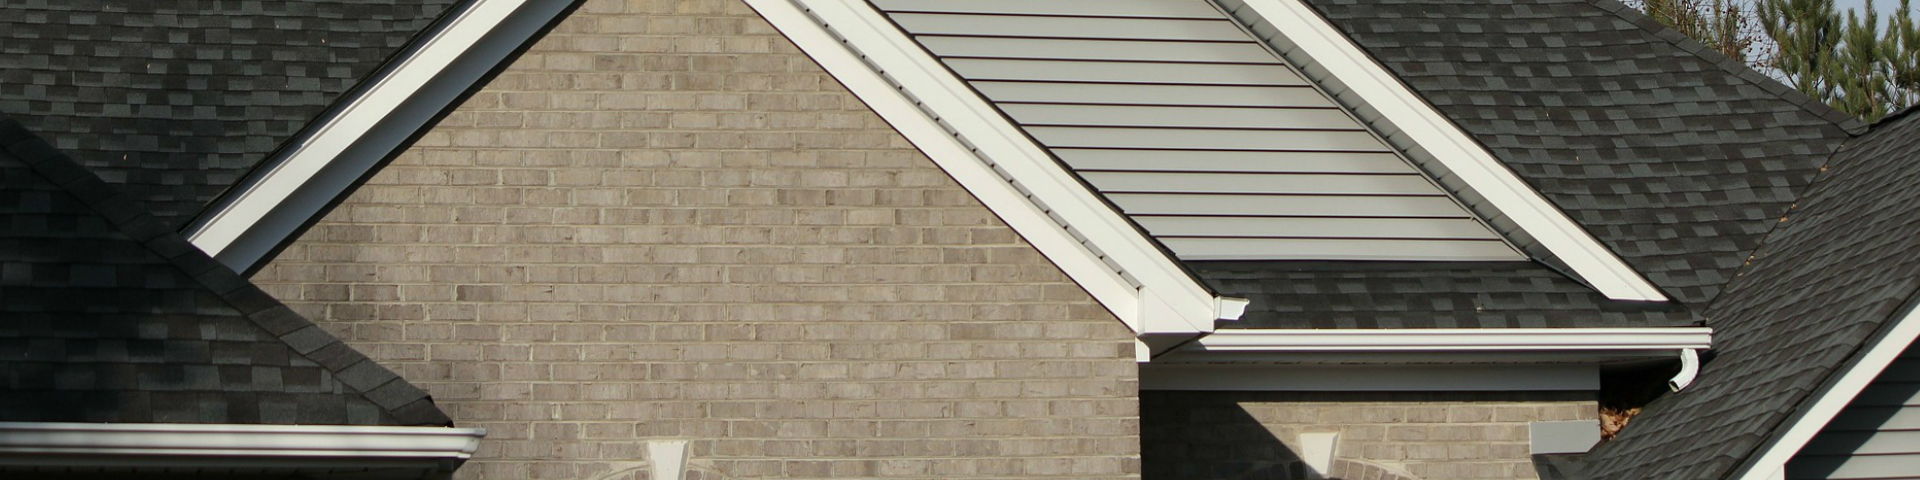 home Gutter guard Installation Long Island ny